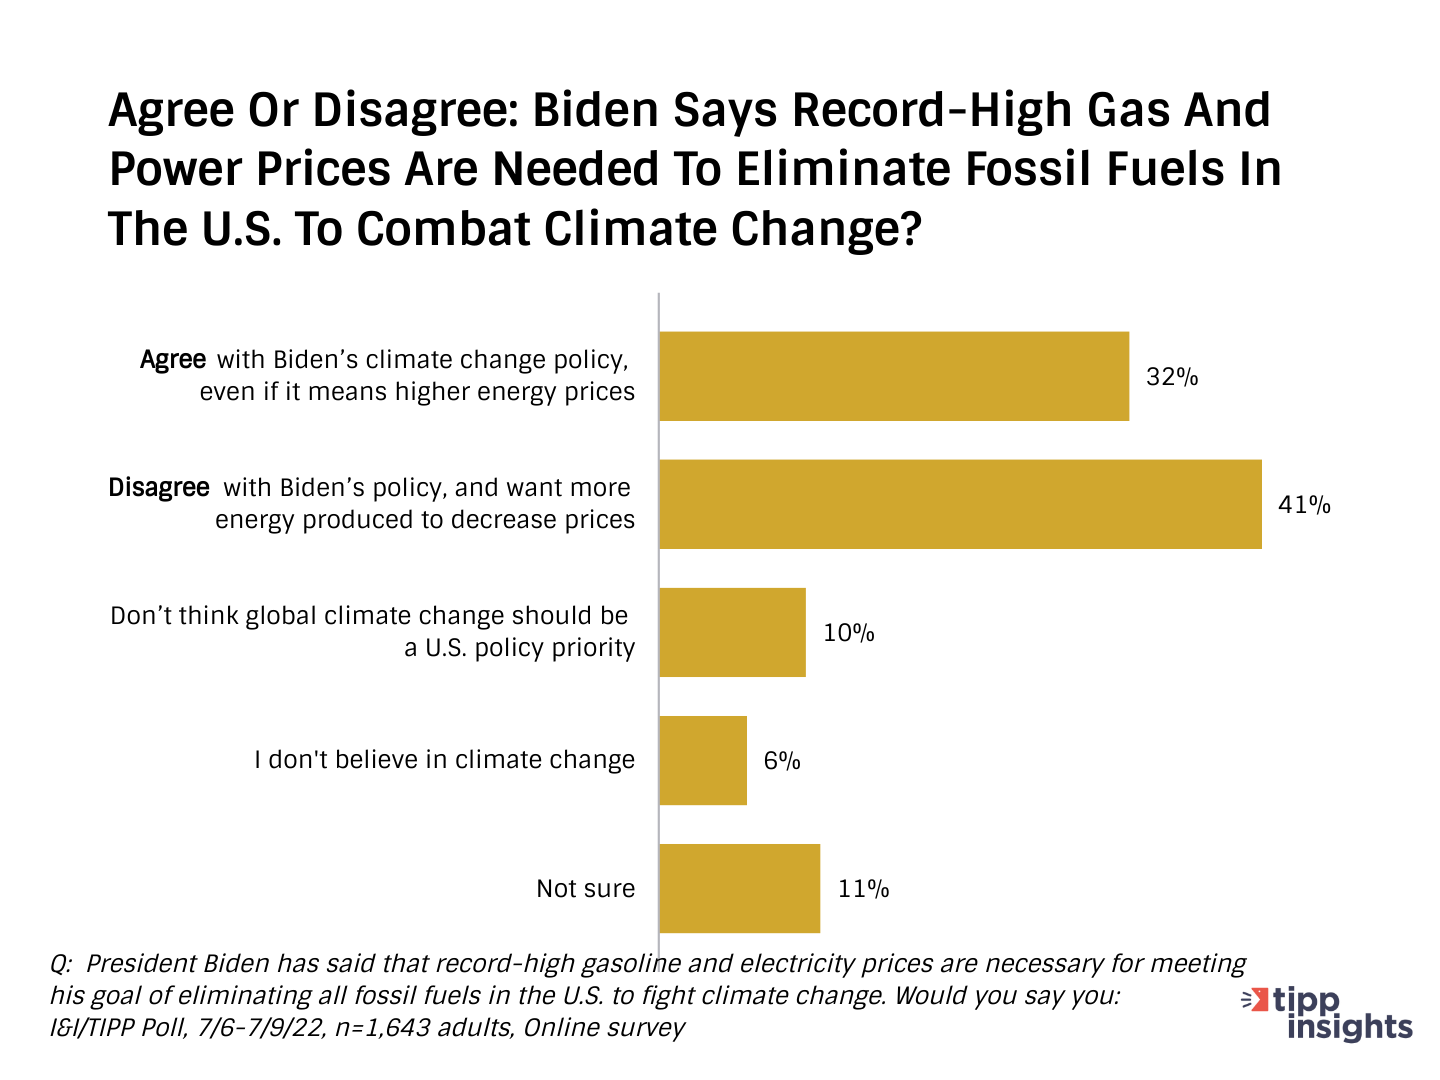 I&I/TIPP Poll Results: Do americans think high gas and power prices will help combat climate change?